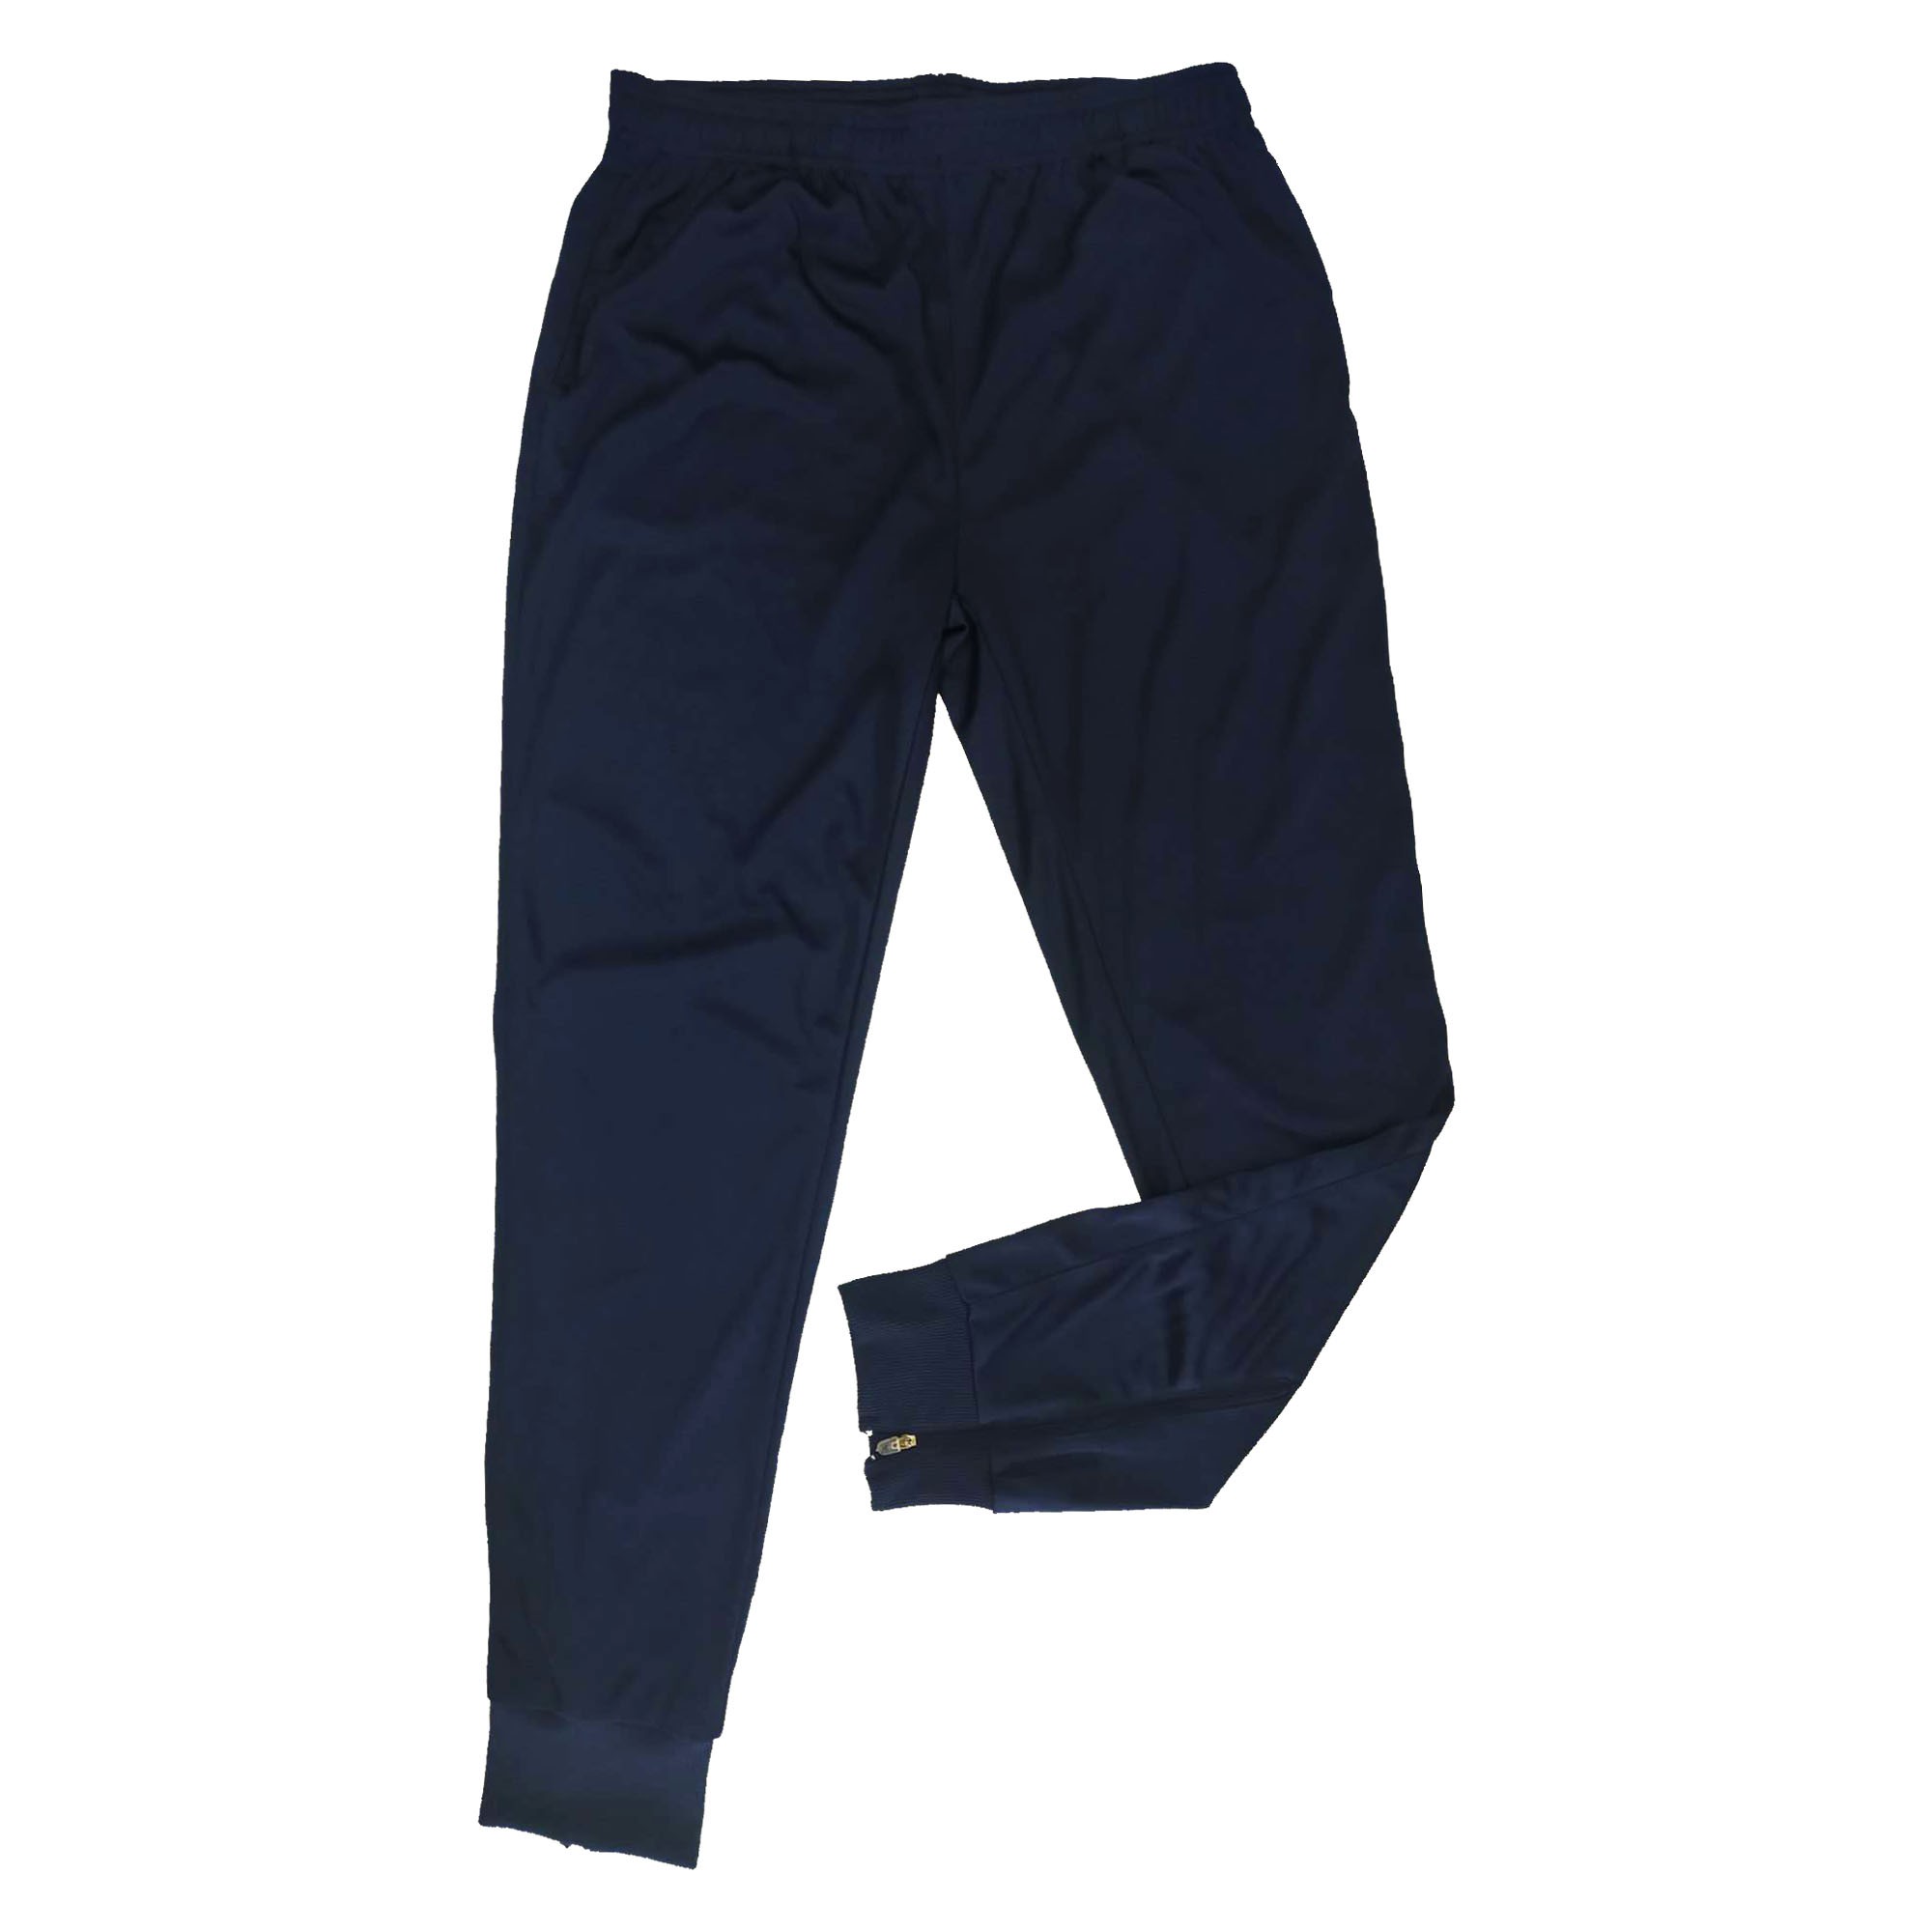 Men’s Athletic Workout Trousers with zipped hem